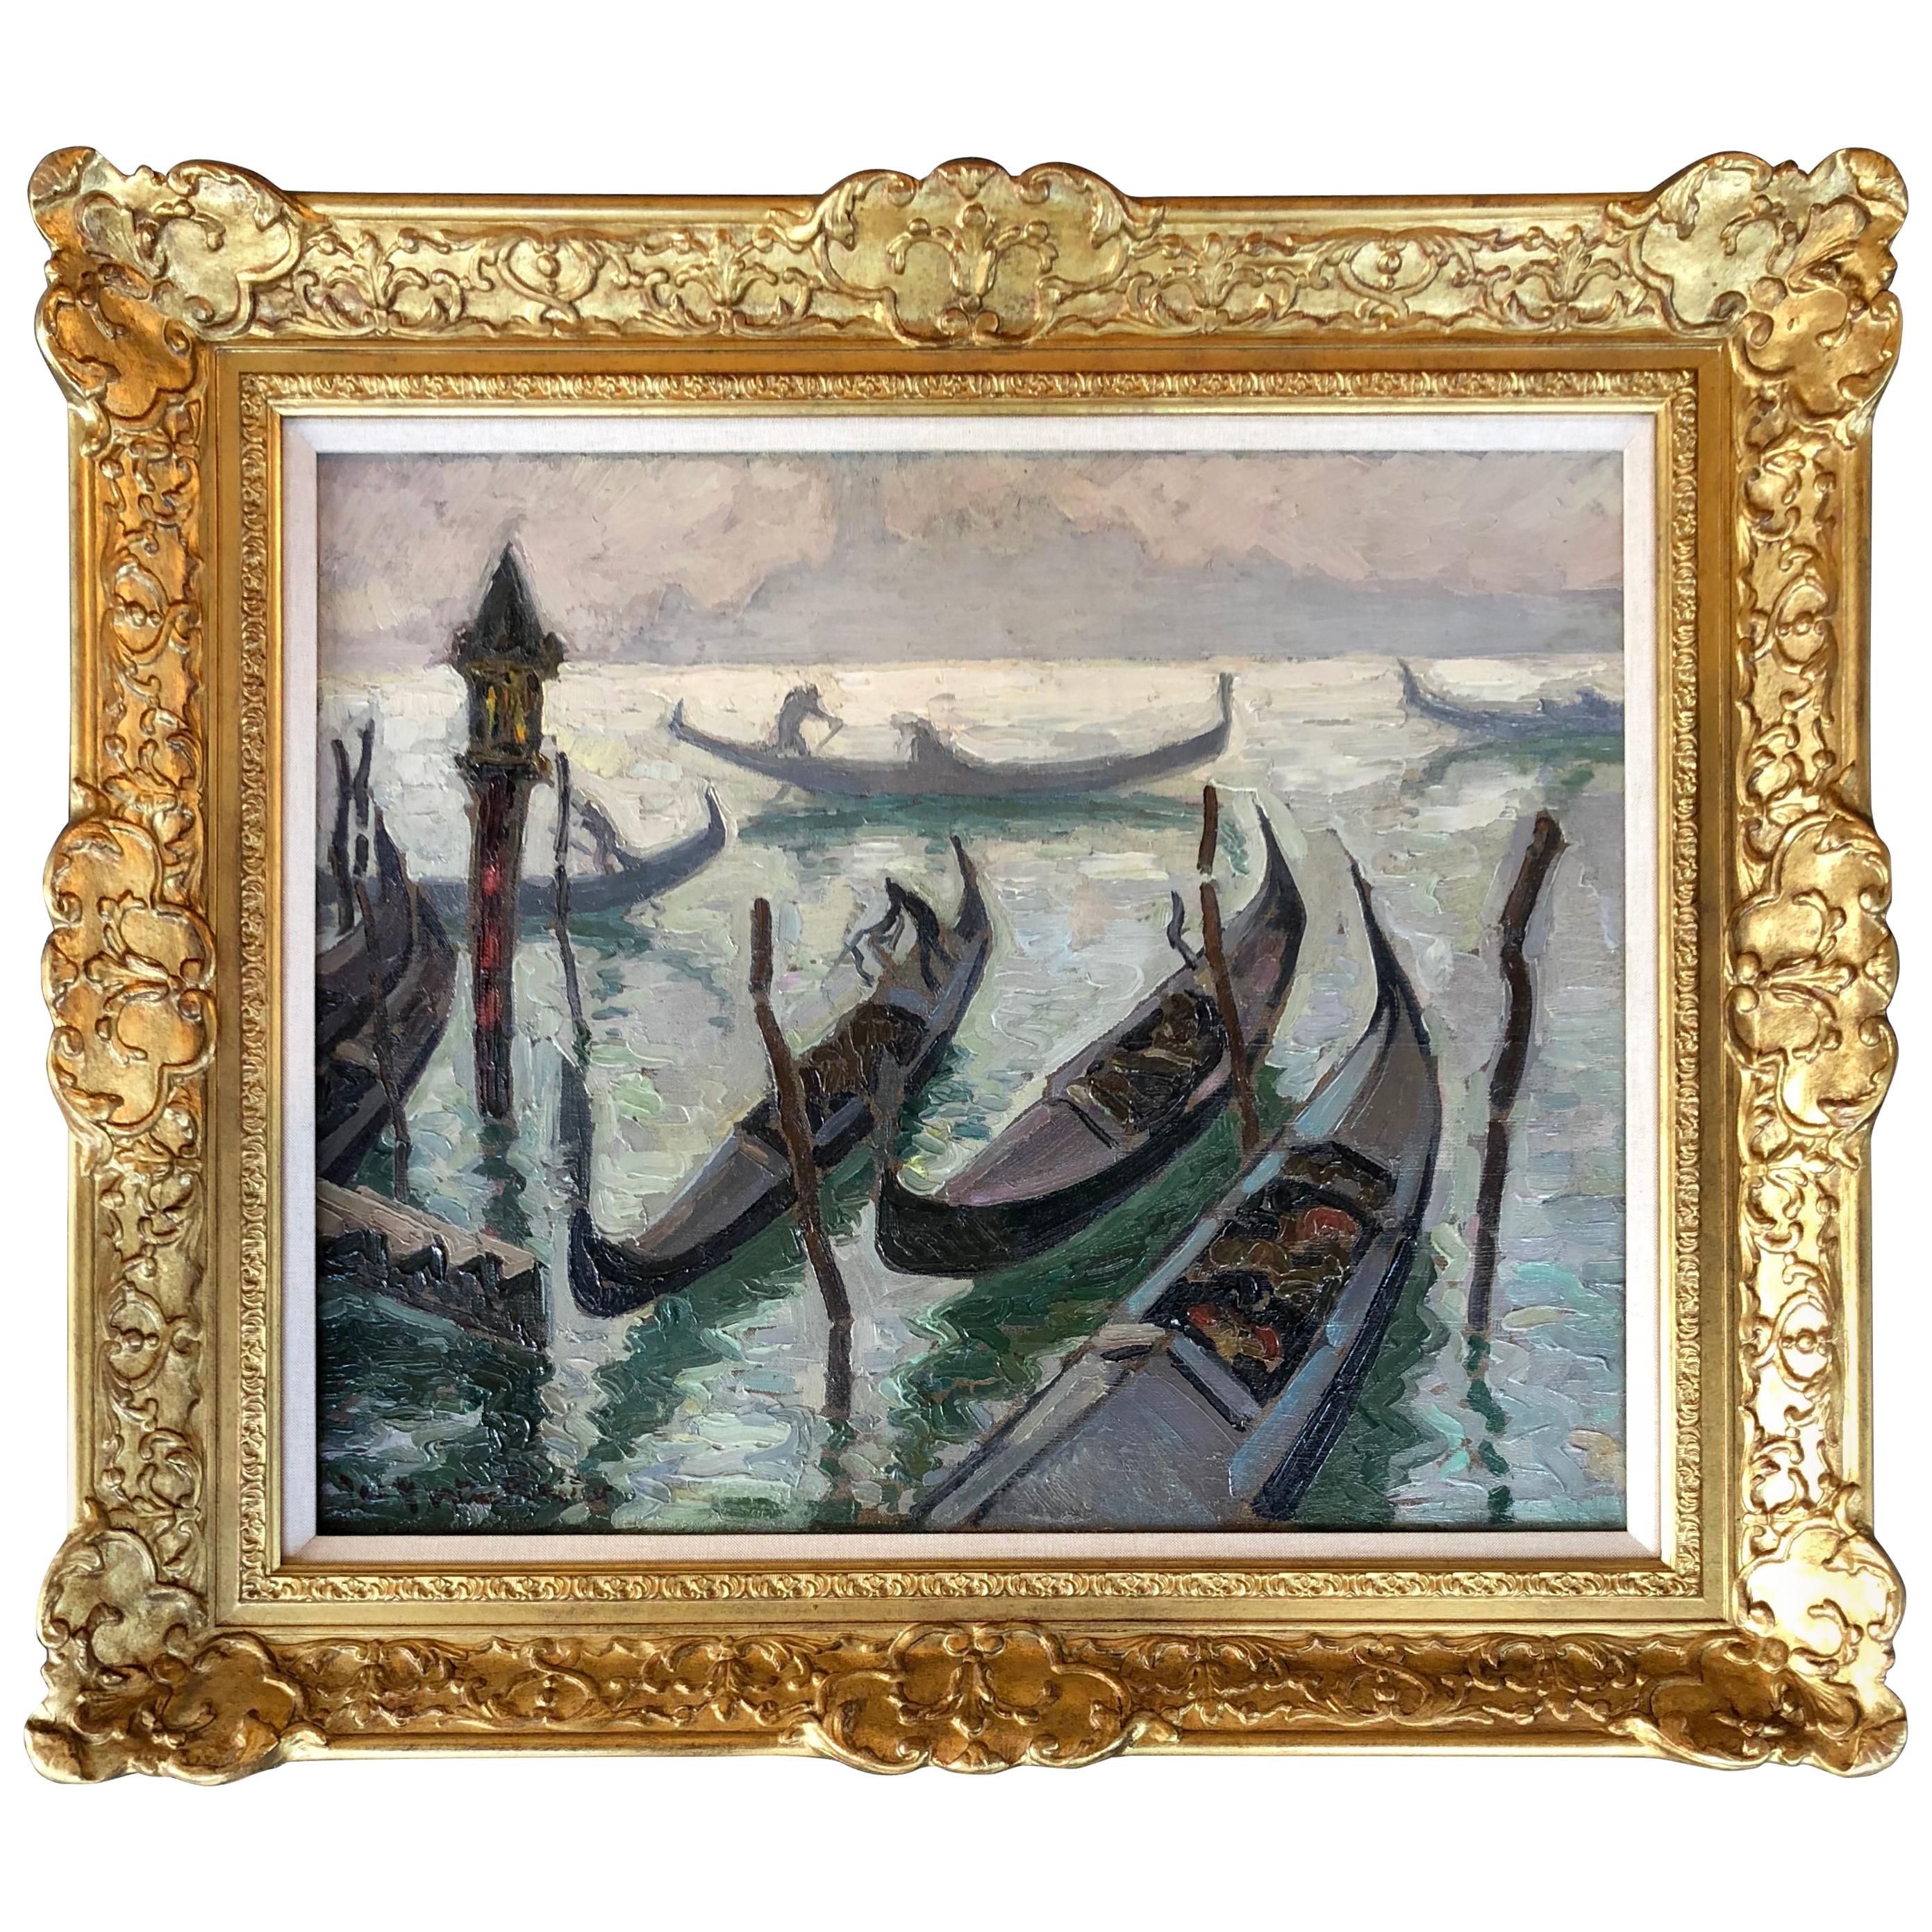 "Gondoliers in Venice" by Jacques Martin-Ferrières